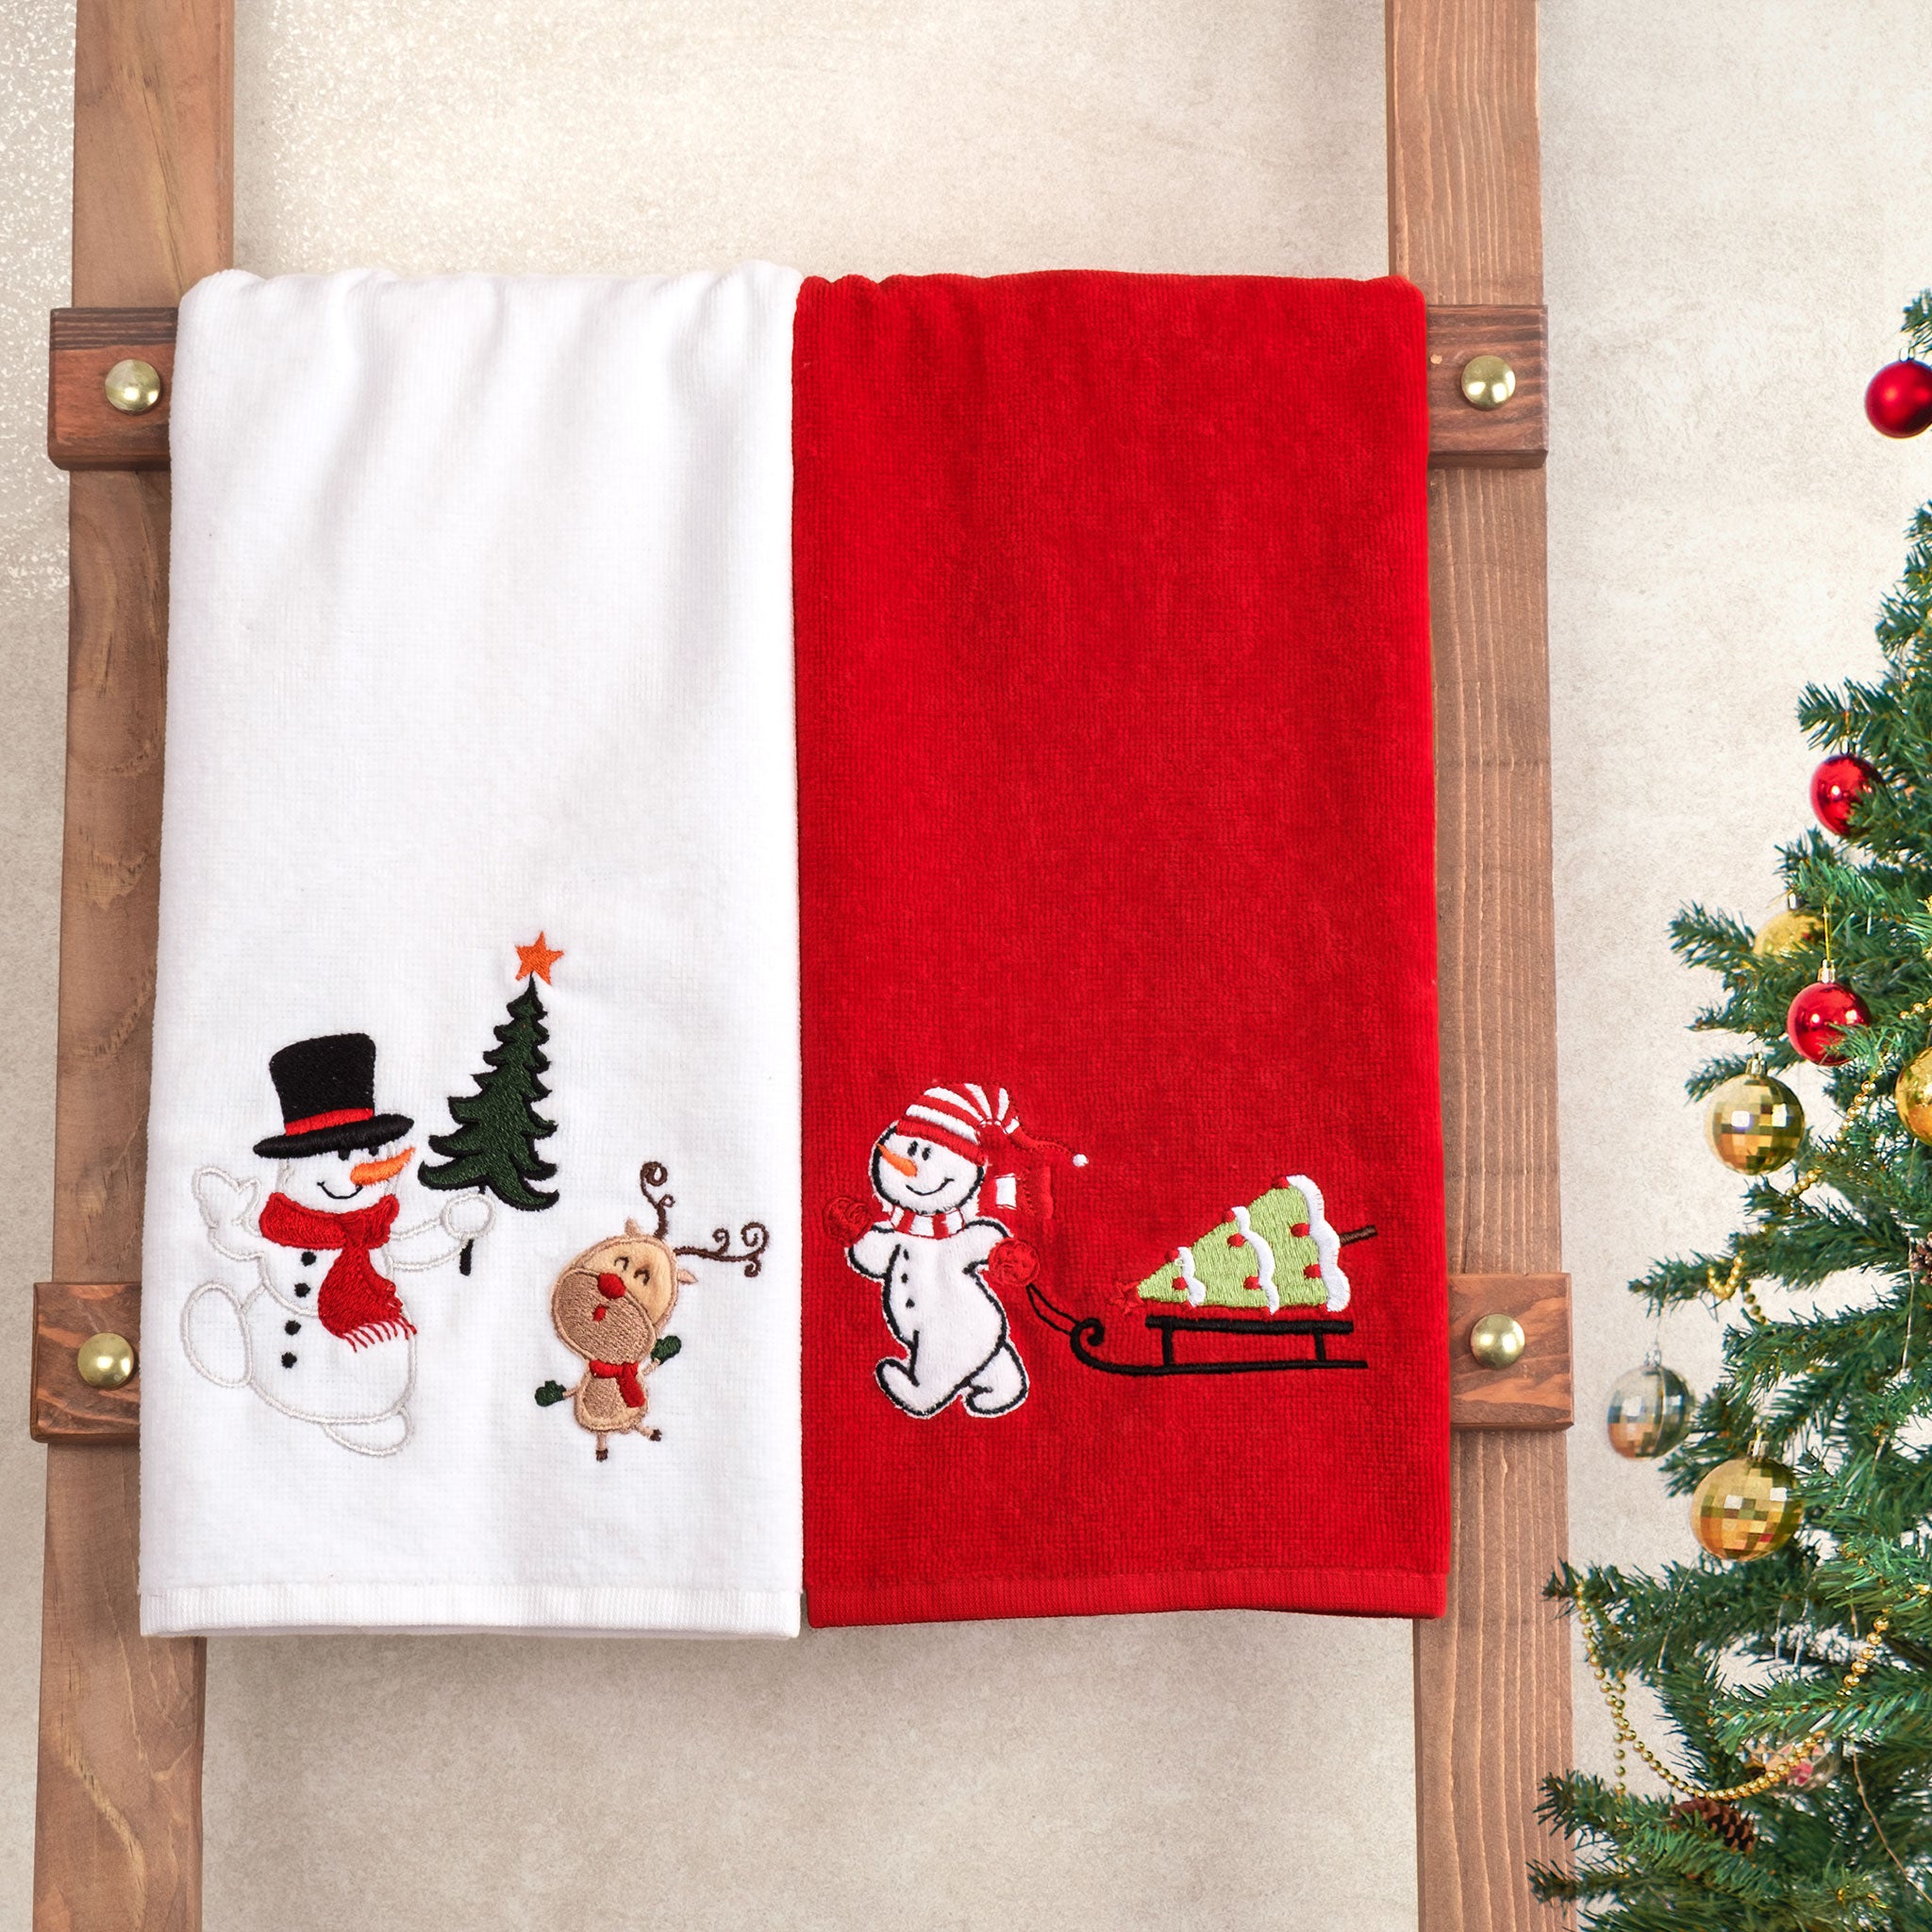 American Soft Linen - Christmas Towels 2 Packed Embroidered Towels for Decor Xmas - Snowmen - 2